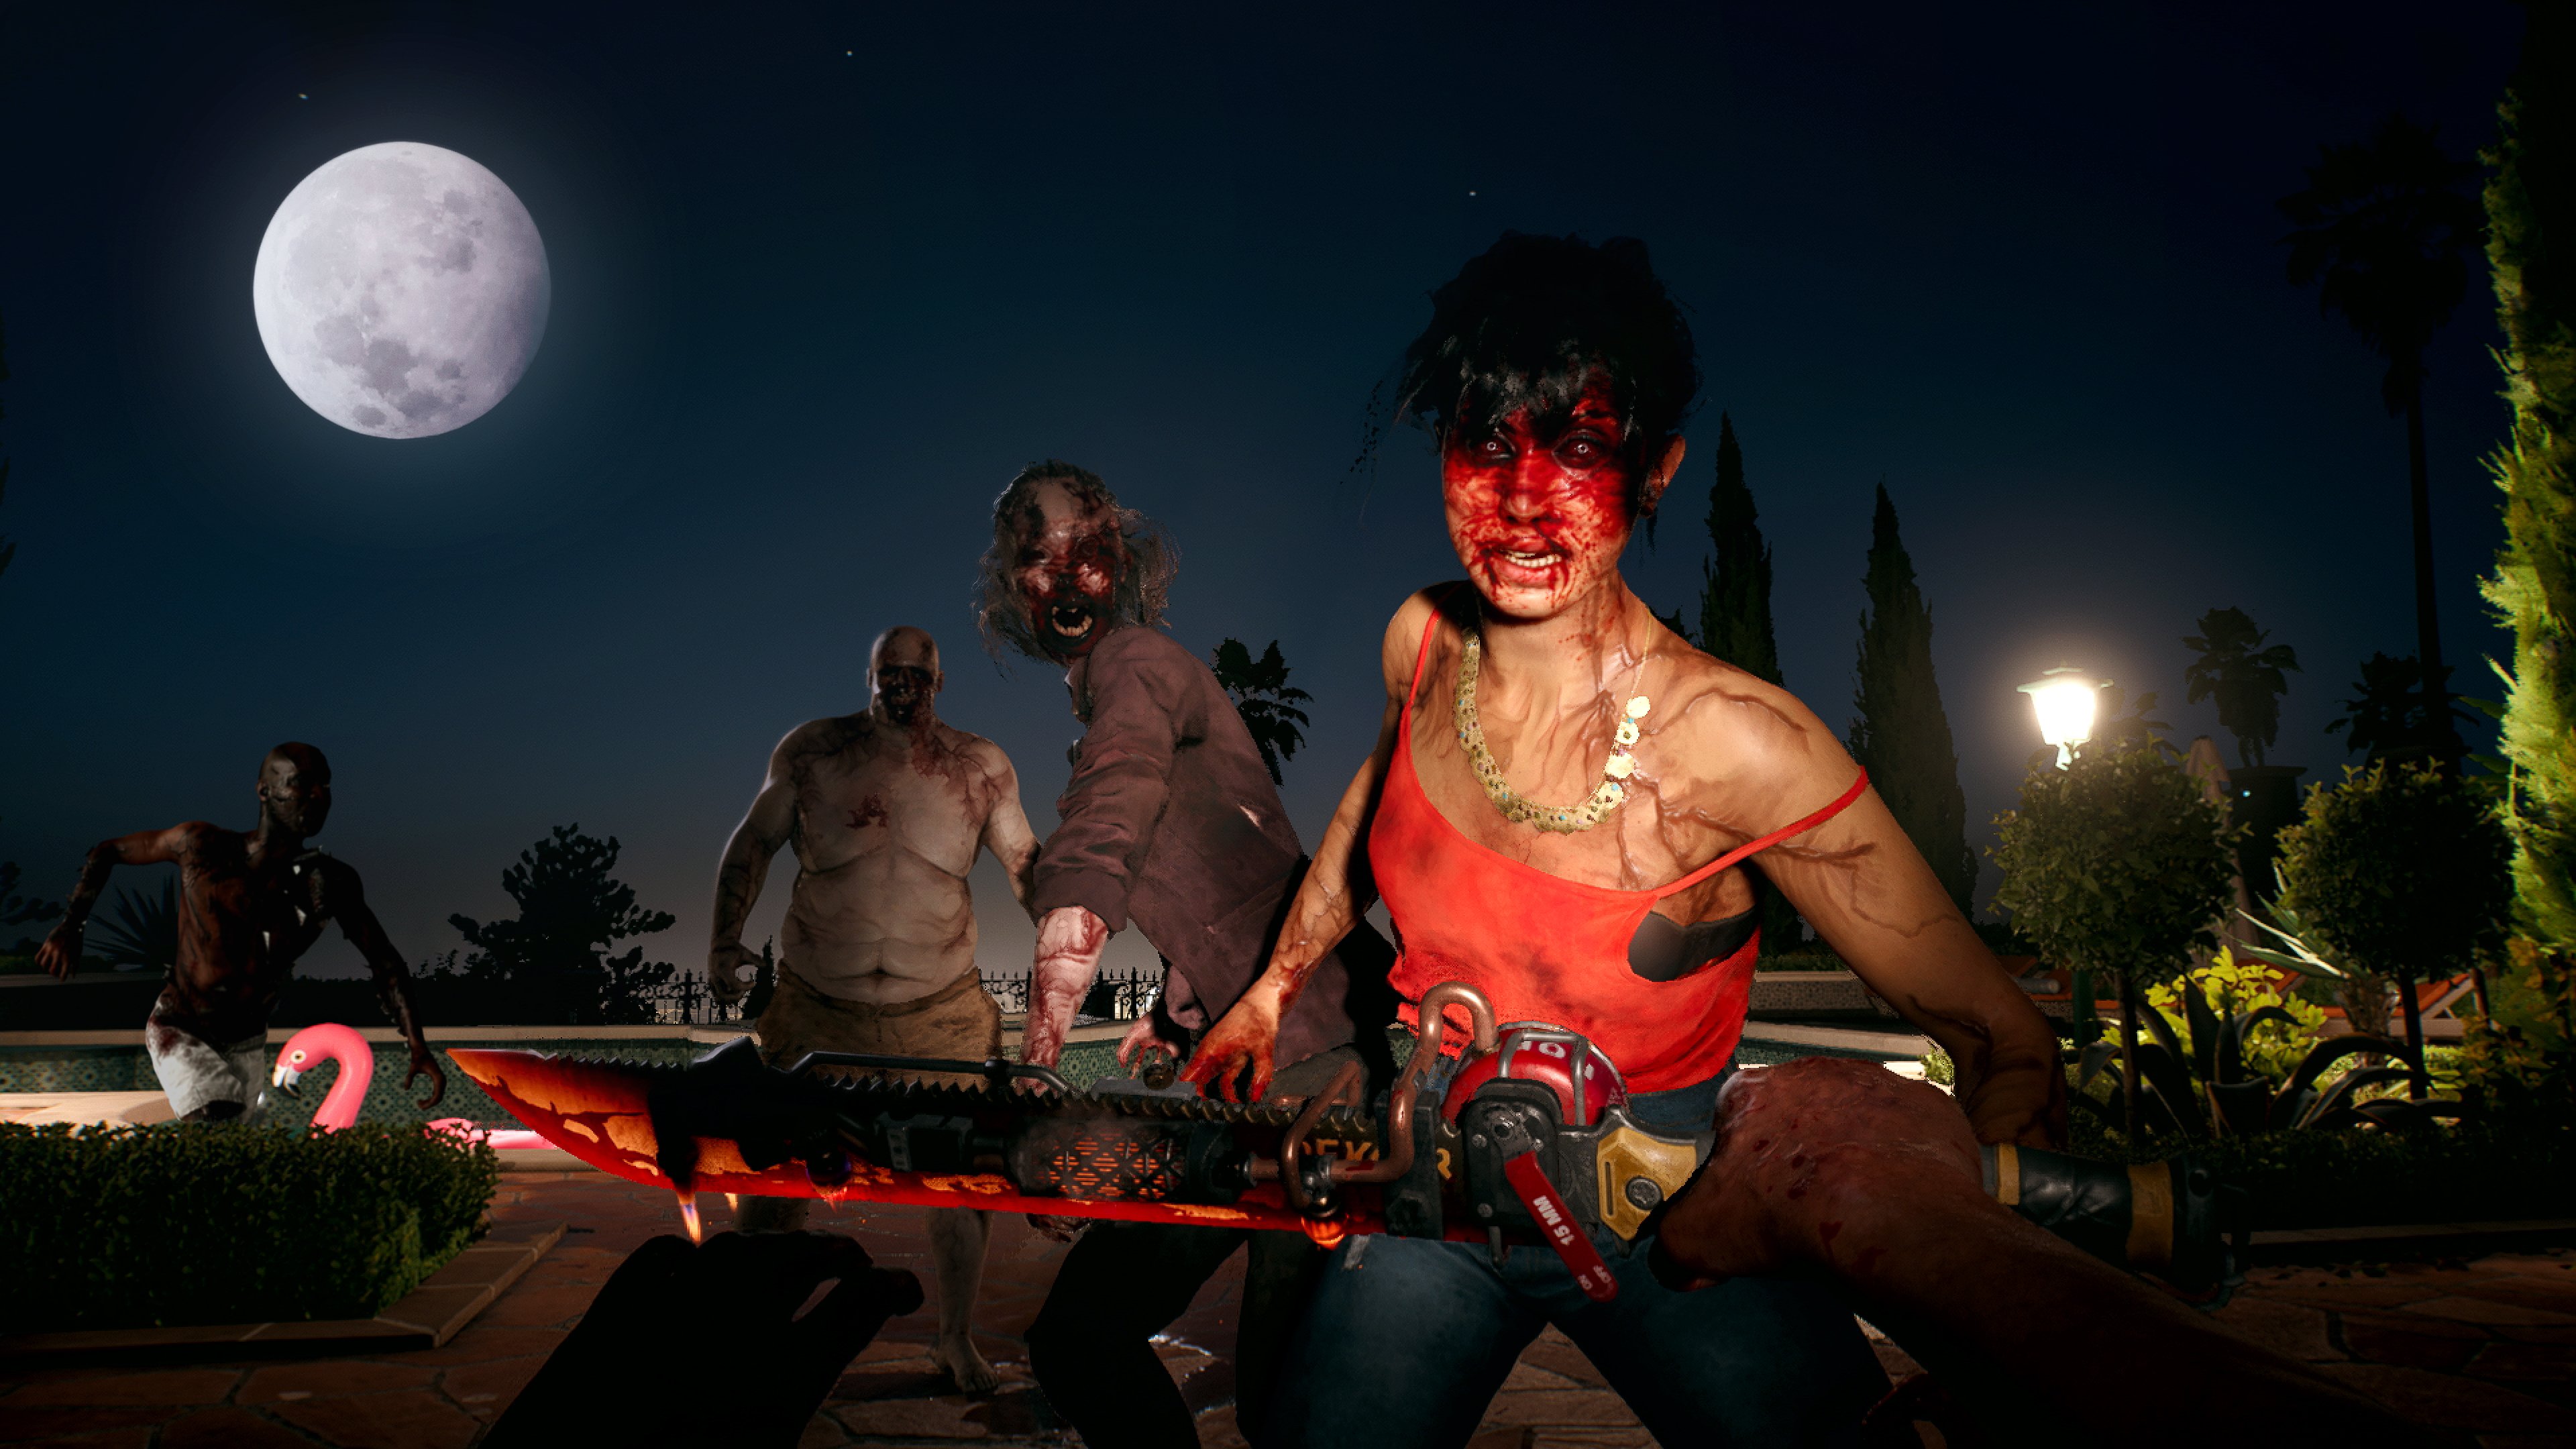 Dead Island 2 Full Game Length Revealed Ahead Of Xbox Launch This April